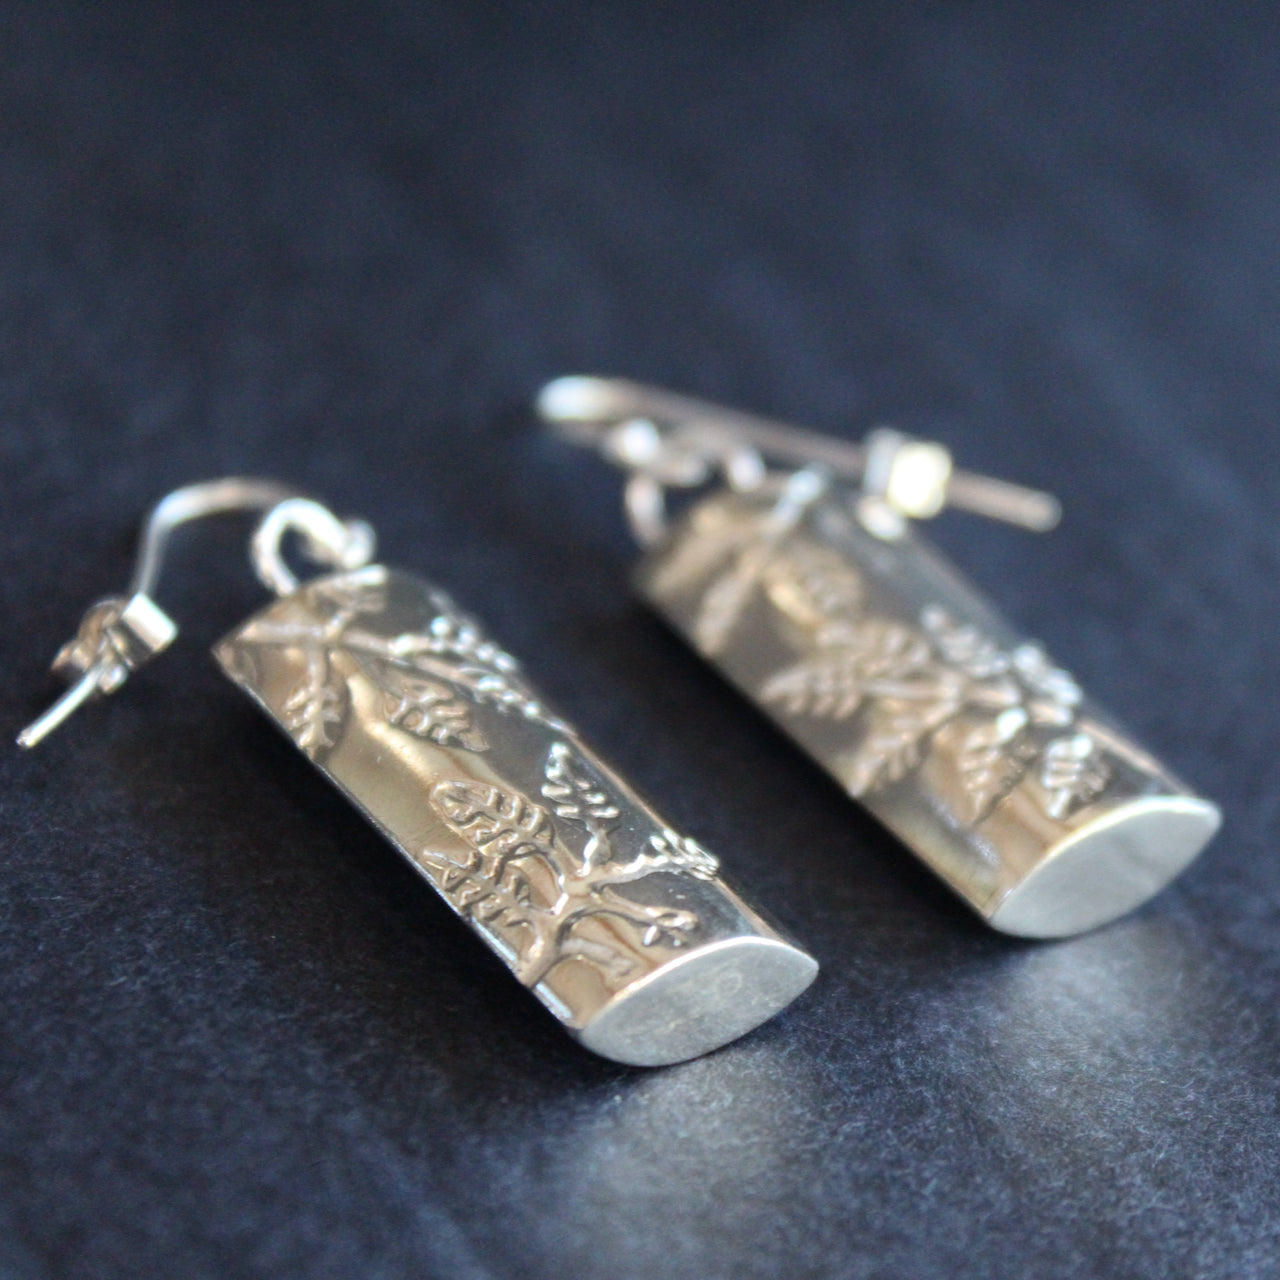 Plantae earrings with embossed ash leaves in silver by Beverly Bartlett